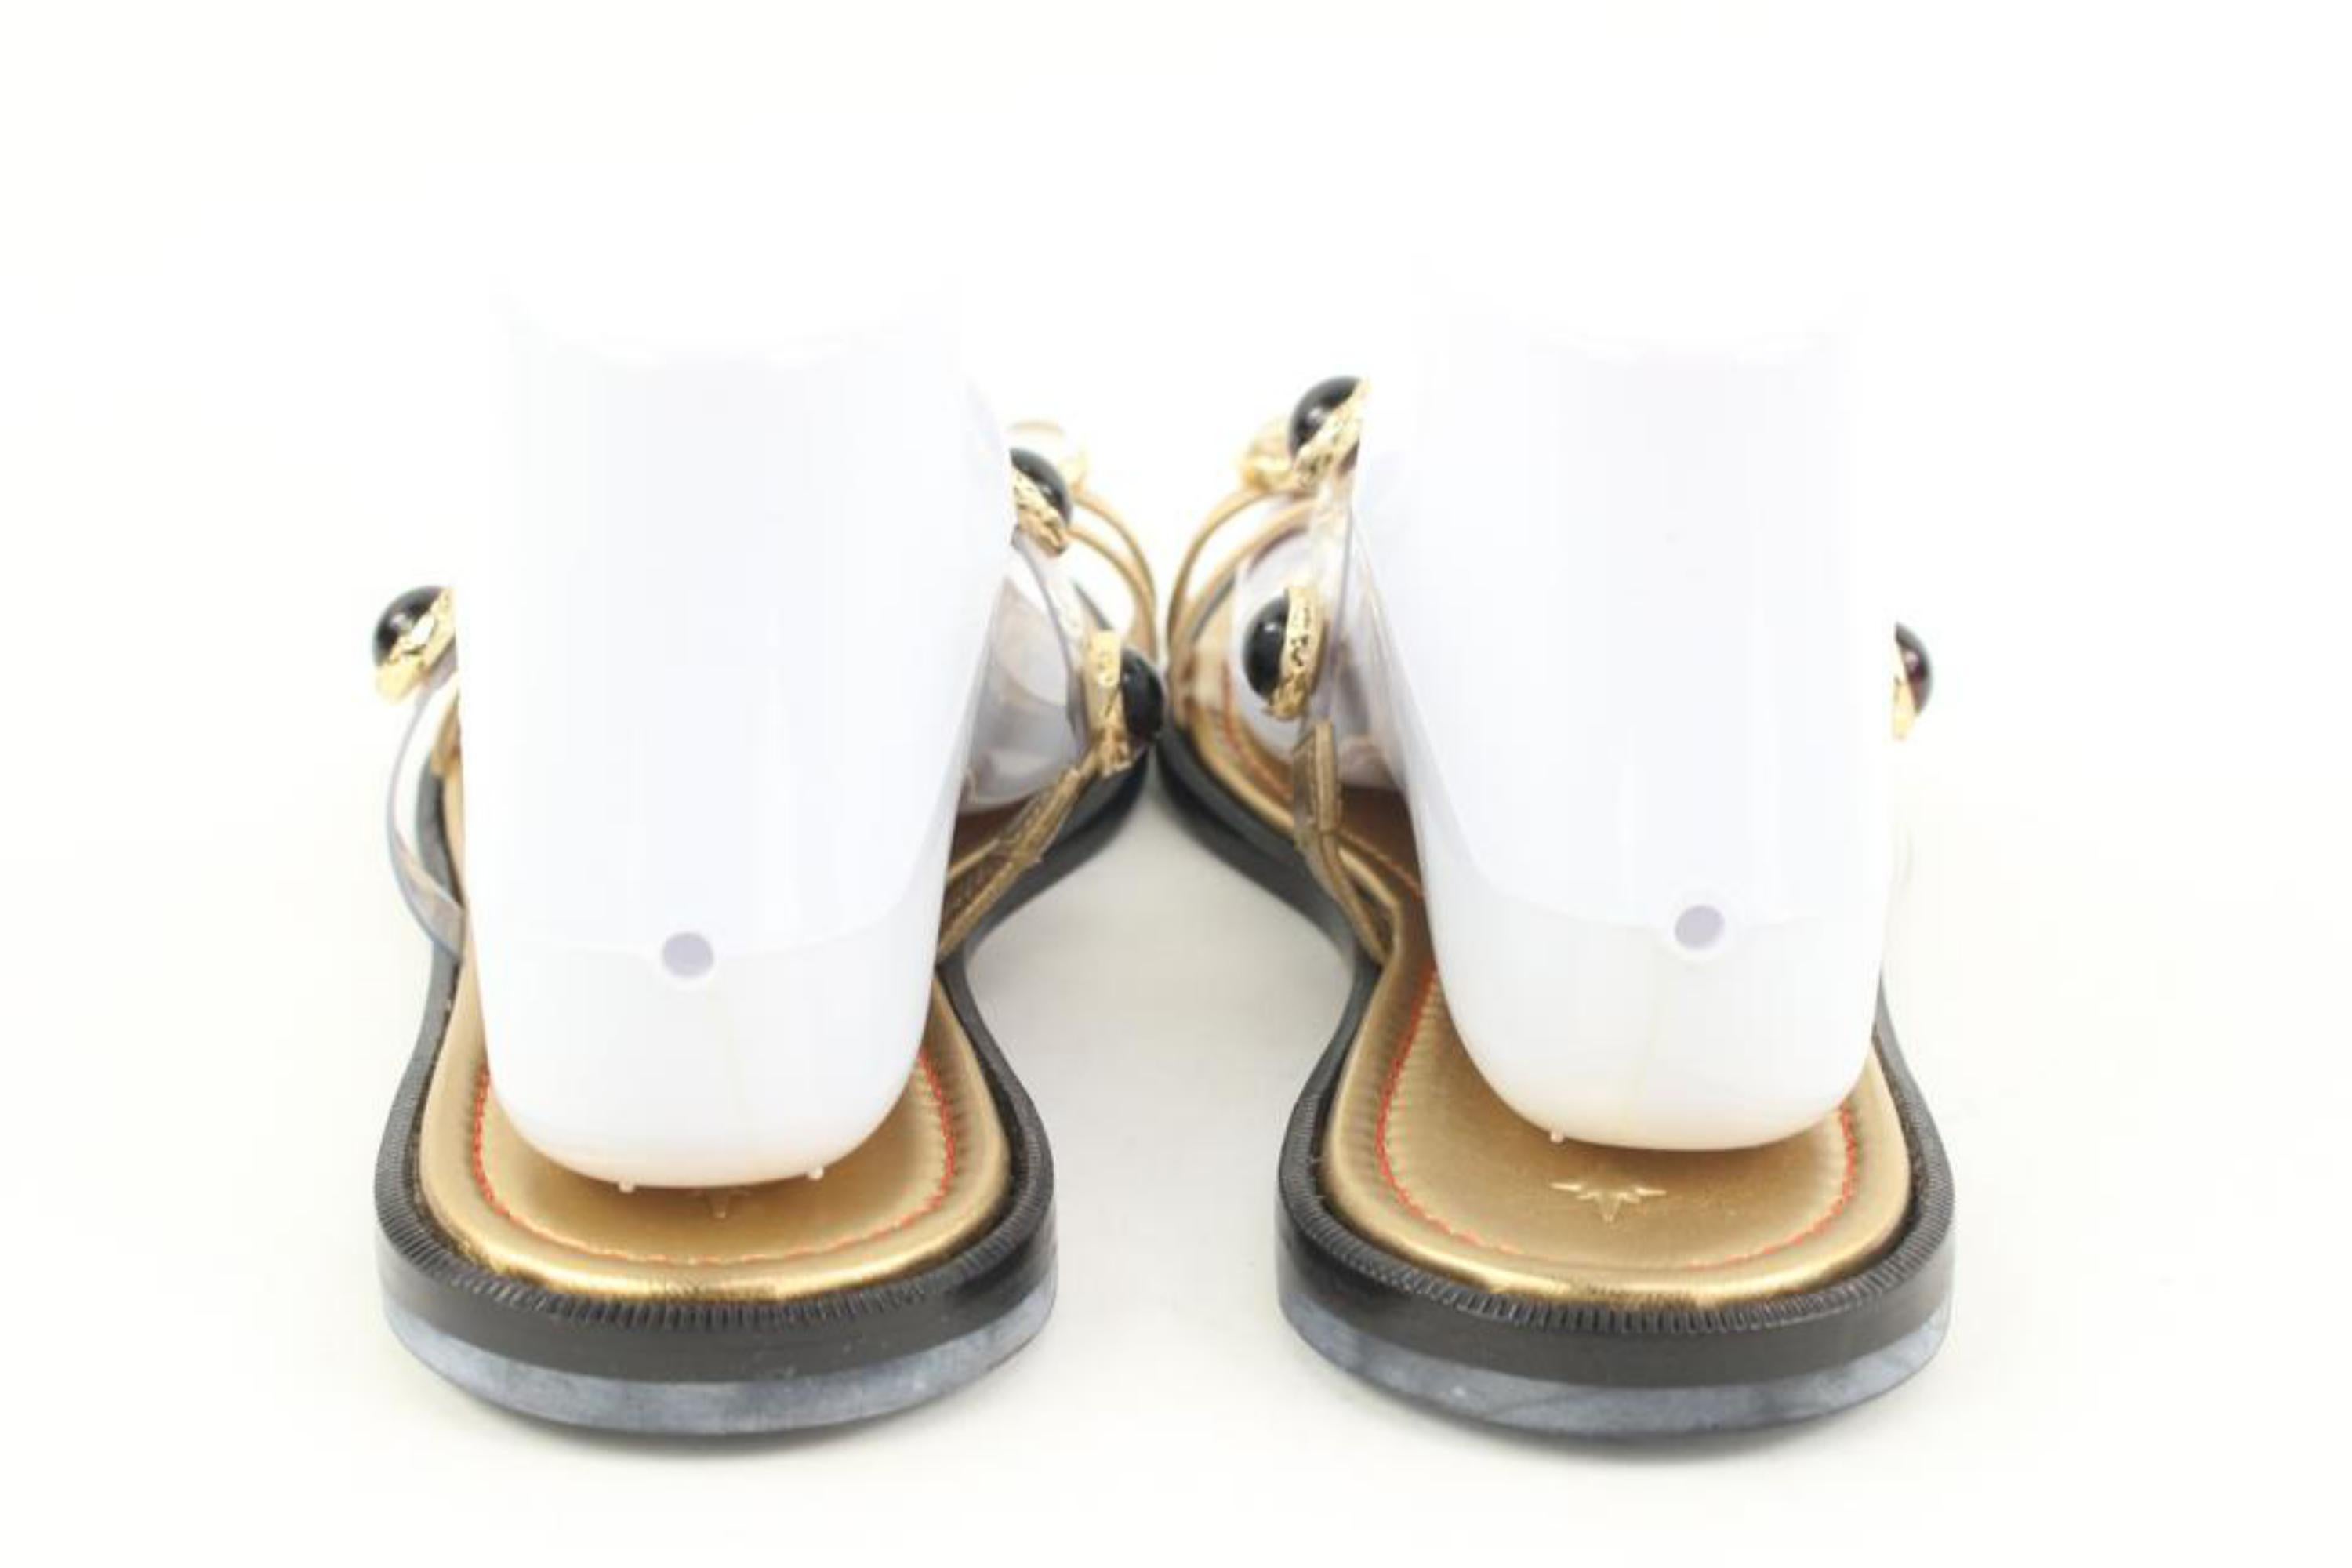 Nodaleto Sz 38 $735 Bulla Salem Flat Jeweled Gold Sandals 39n31s 40n321s In New Condition In Dix hills, NY